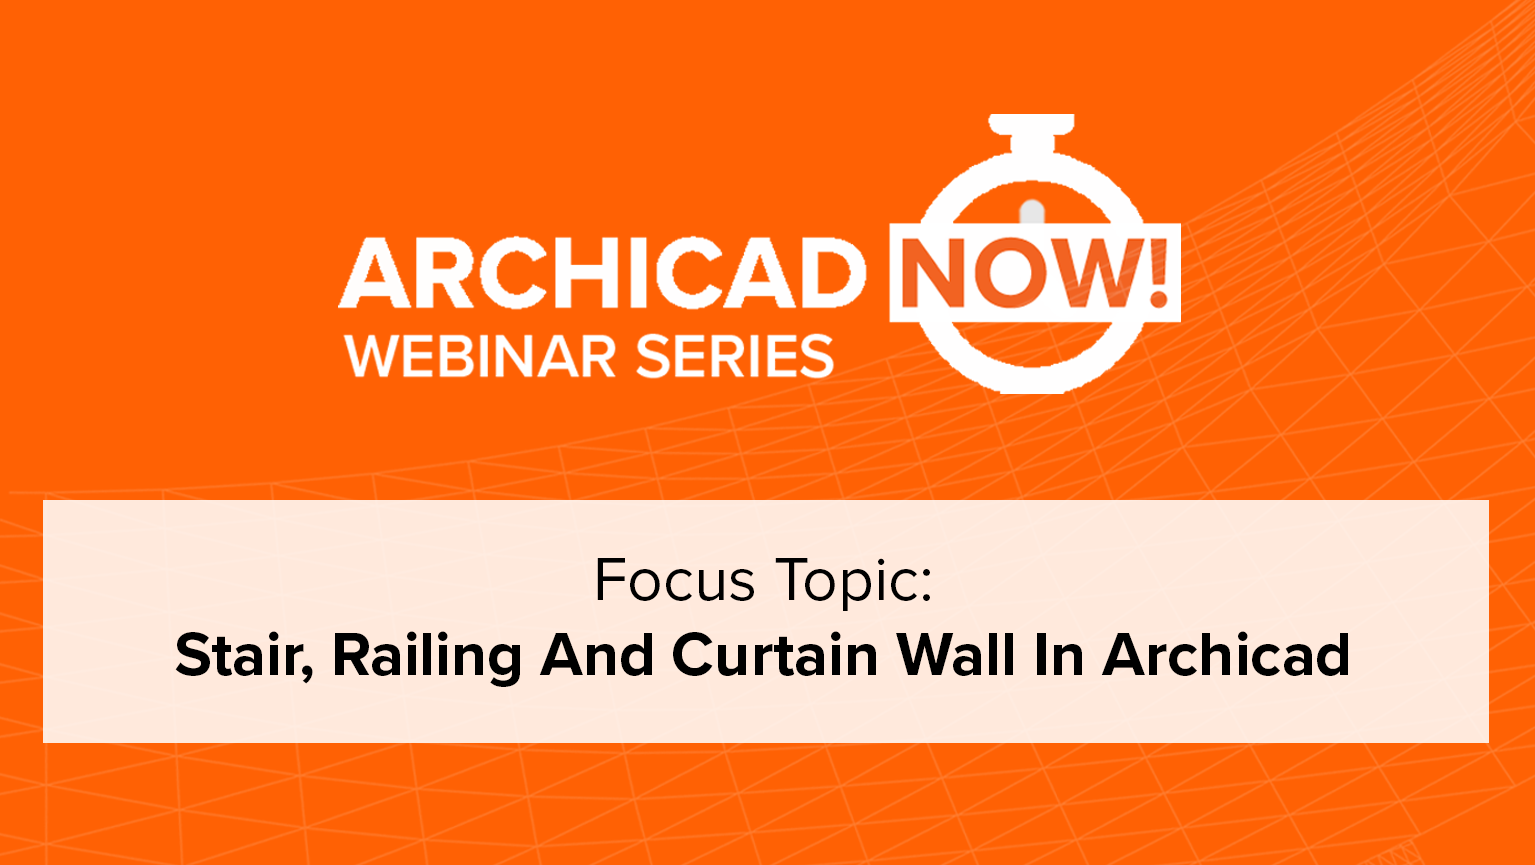 Archicad Now! Webinar Series: Stair, Railing and Curtain Wall in Archicad